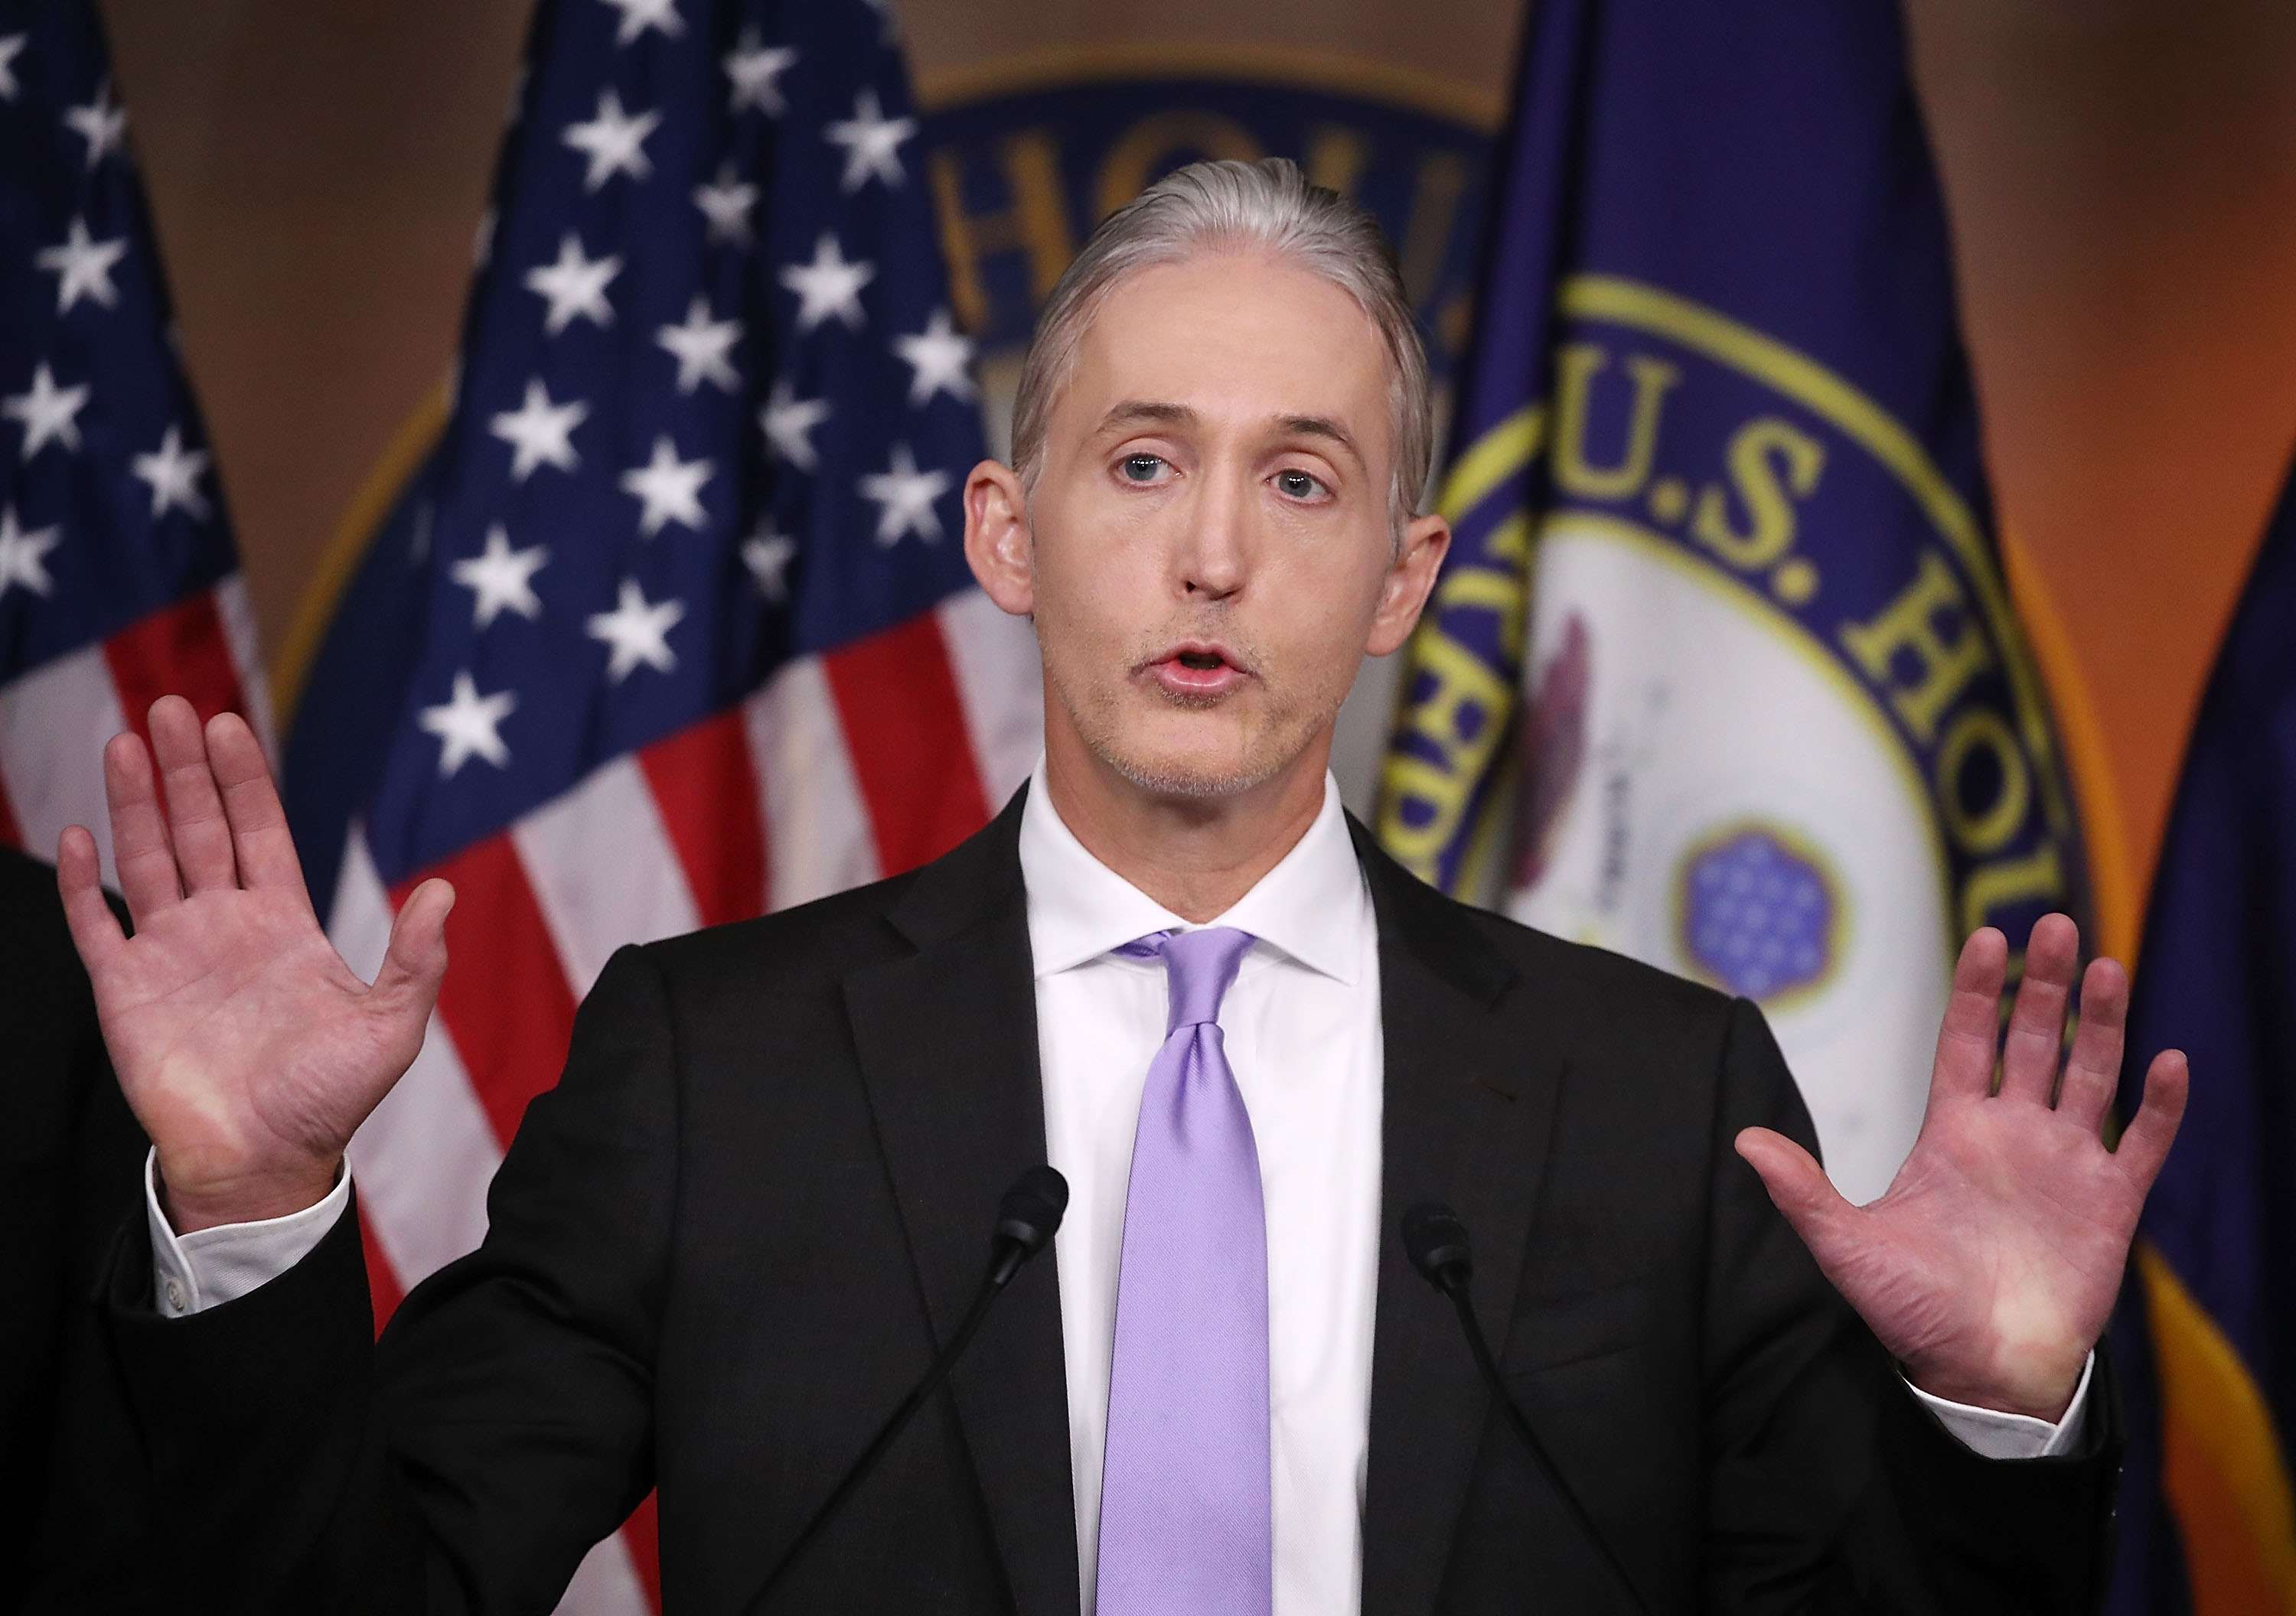 WASHINGTON, DC - JUNE 28: House Benghazi Committee Chairman, Trey Gowdy (R-SC), participates in a news conference with fellow Committee Republicans after the release of the Committees Benghazi report on Capitol Hill June 28, 2016 in Washington, DC. U.S. Ambassador Chris Stevens and three others were killed during an attack on a U.S. outpost and CIA annex in Libya on September 11, 2012. (Photo by Mark Wilson/Getty Images)